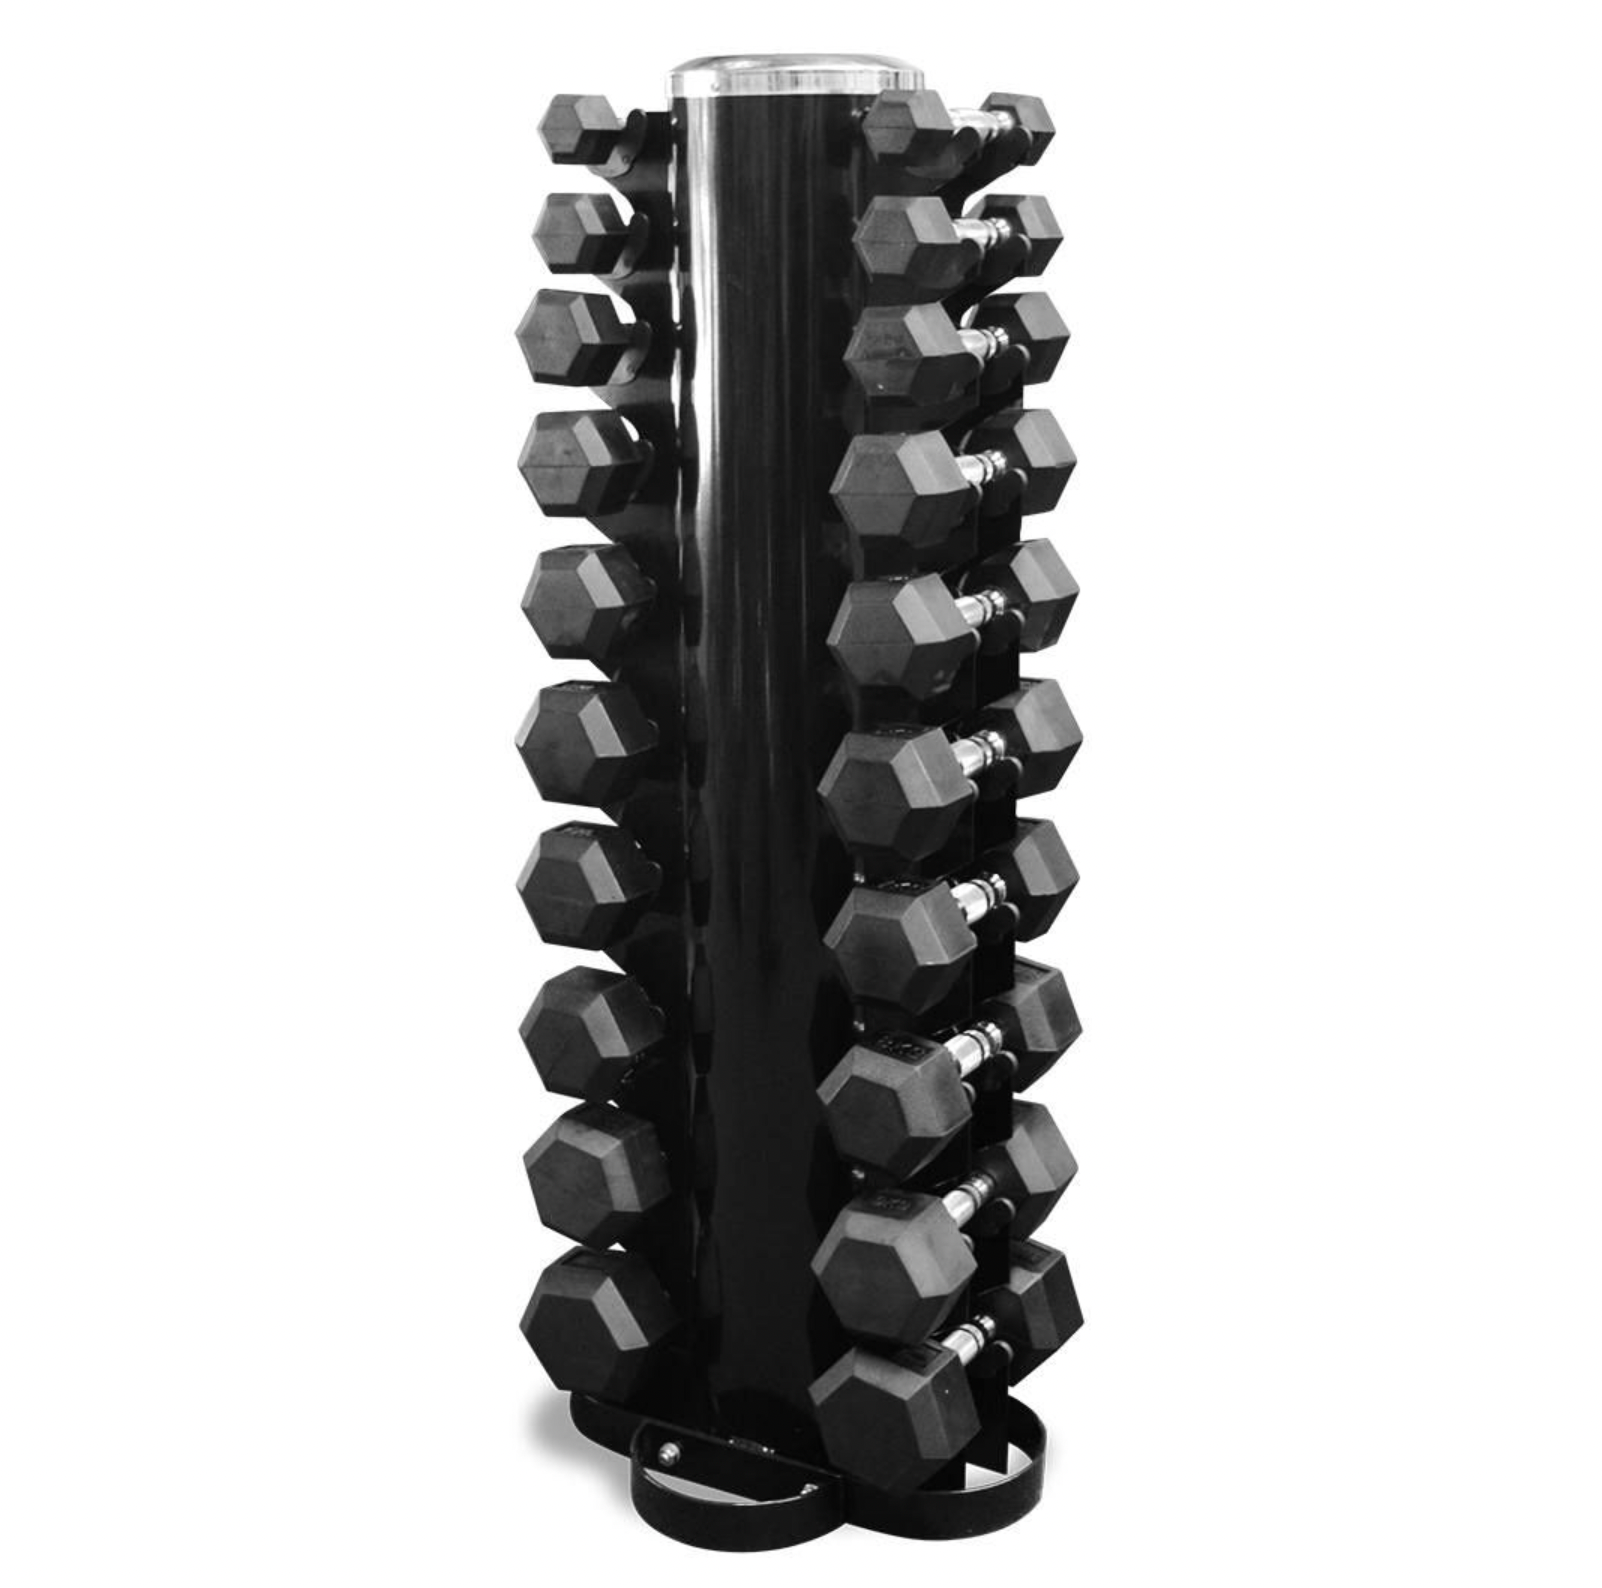 Fitness Hero offers a round vertical dumbbell rack with 10 pairs of commercial grade hex dumbbells. 10 pairs, ranging from 1kg - 10kg. The very best quality dumbbells 